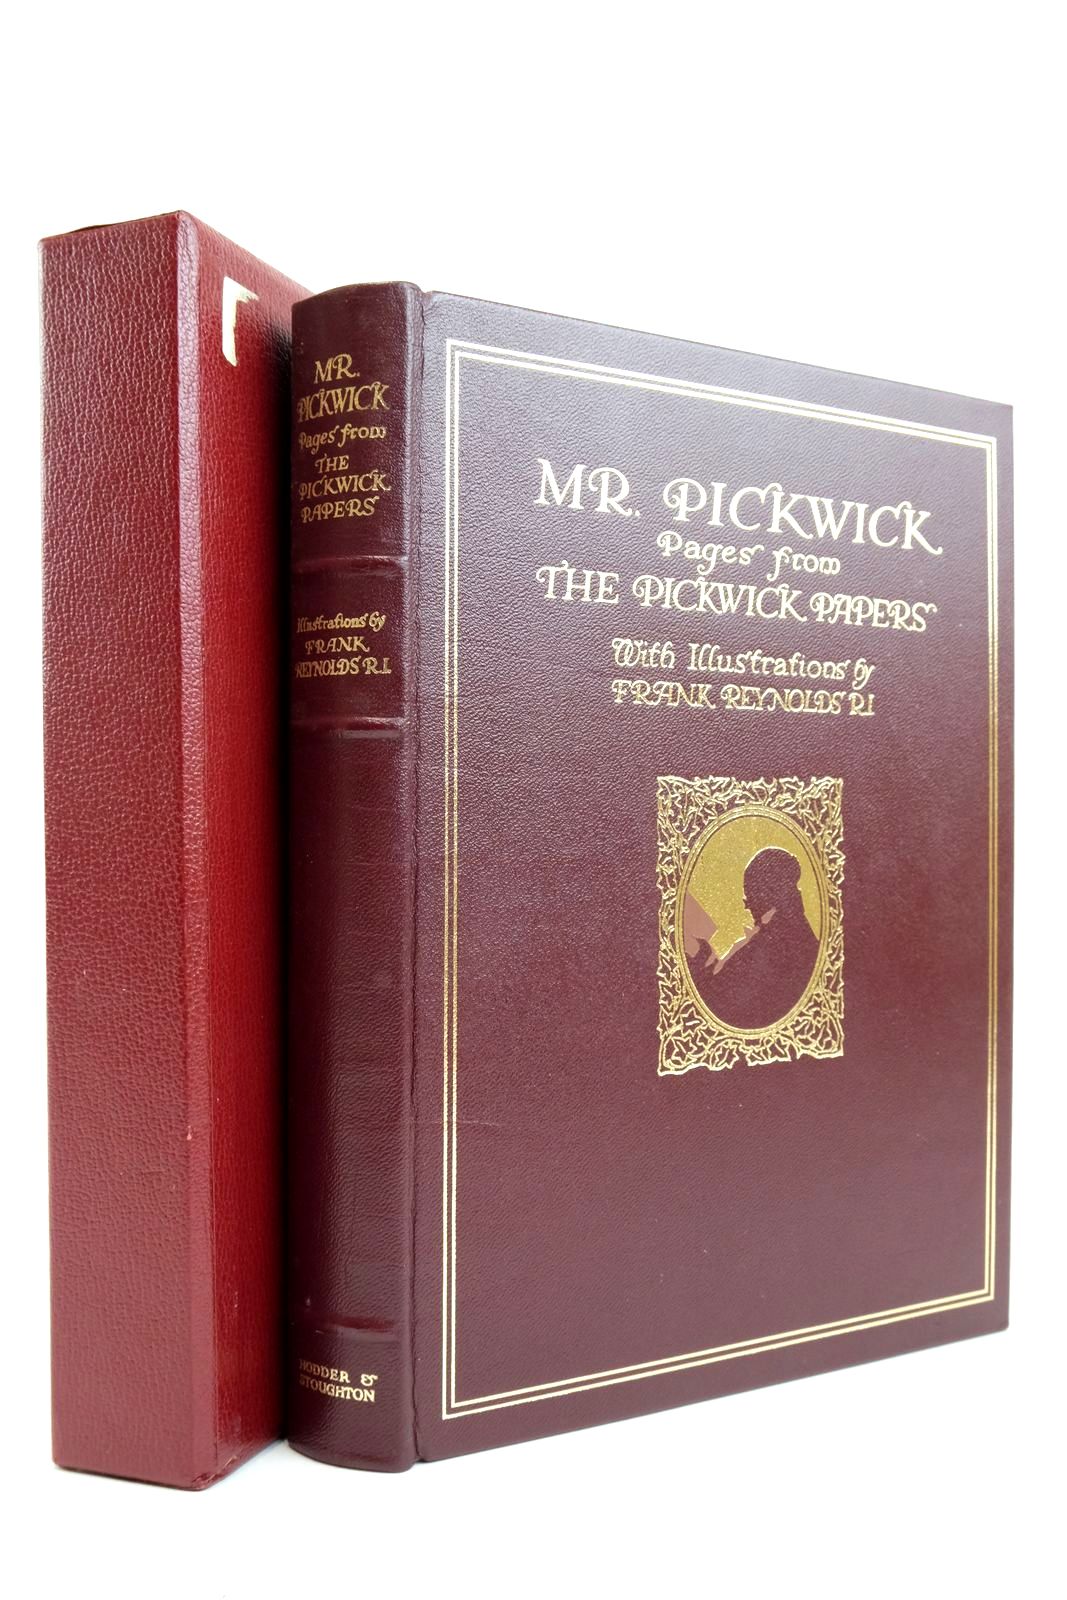 Photo of MR PICKWICK PAGES FROM THE PICKWICK PAPERS written by Dickens, Charles illustrated by Reynolds, Frank published by Hodder &amp; Stoughton (STOCK CODE: 2135912)  for sale by Stella & Rose's Books